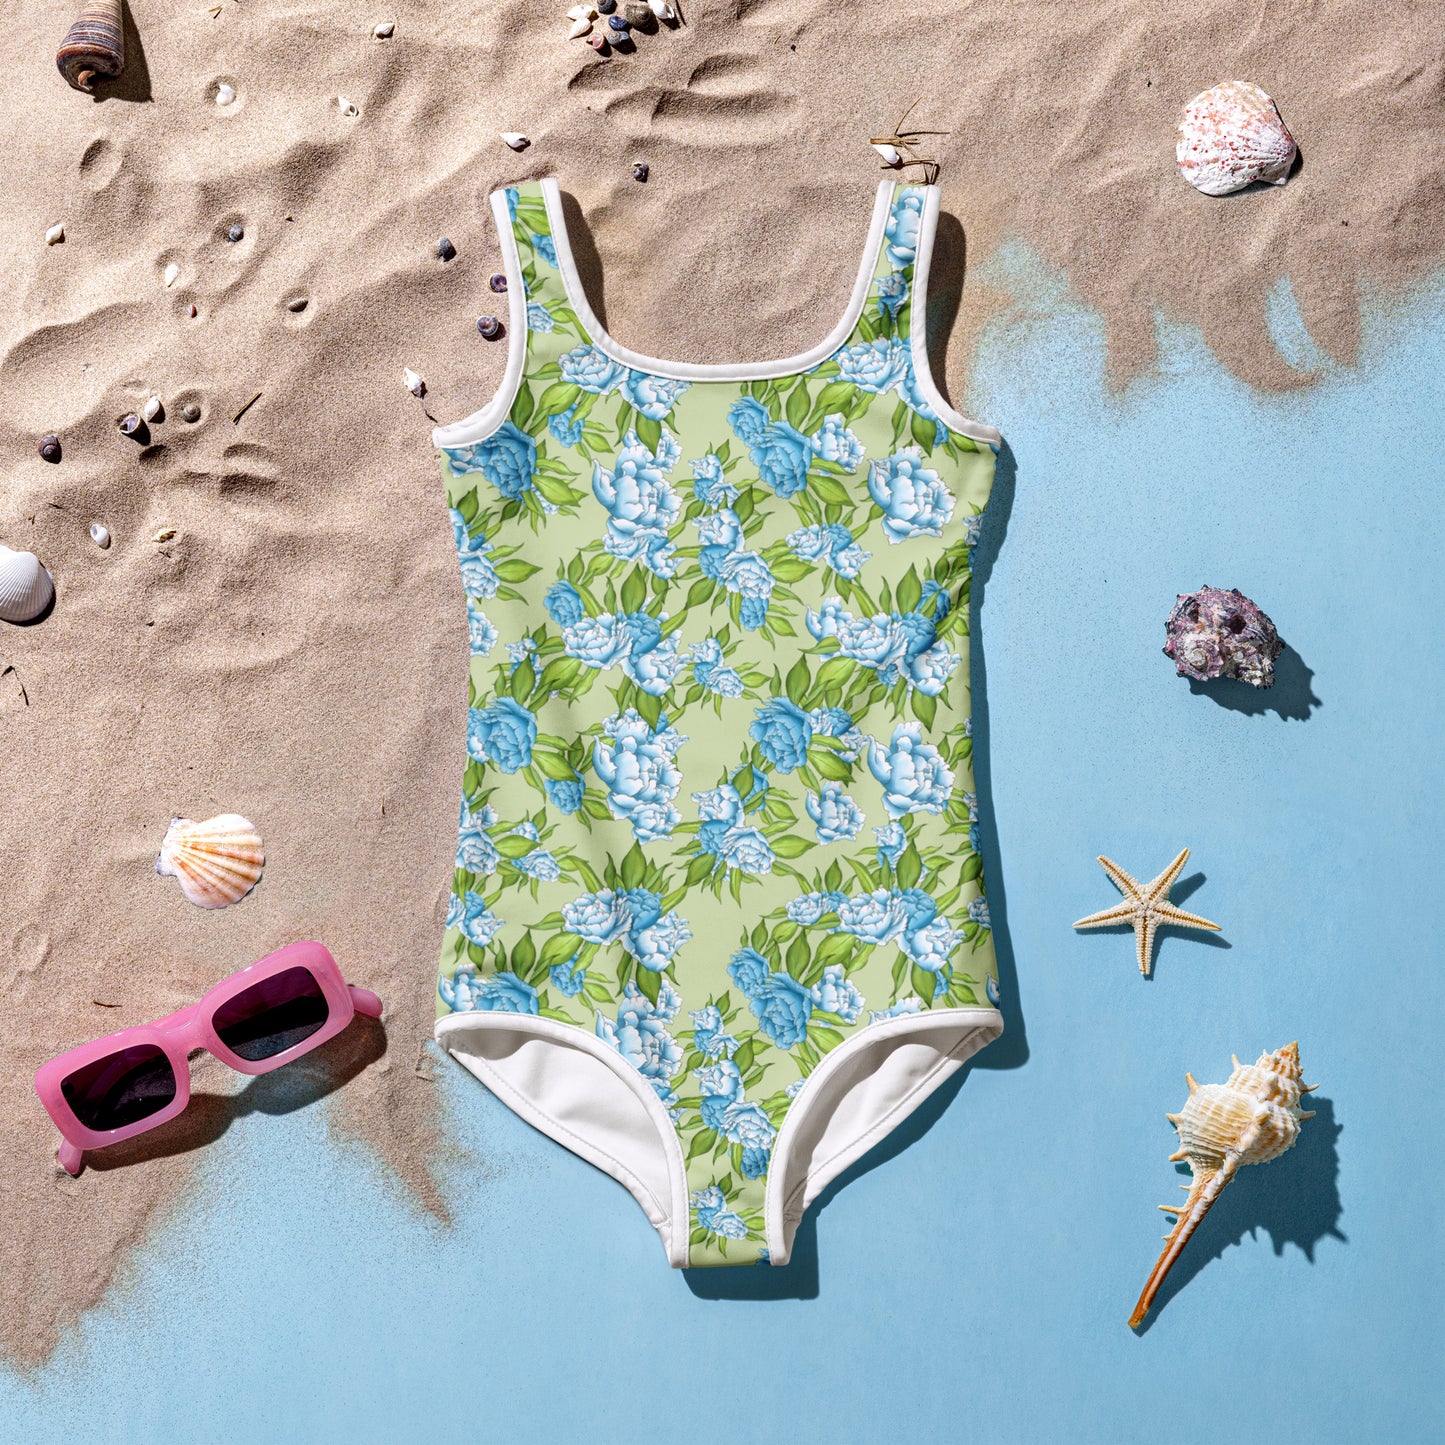 Green and Blue Flowers - Kids Swimsuit